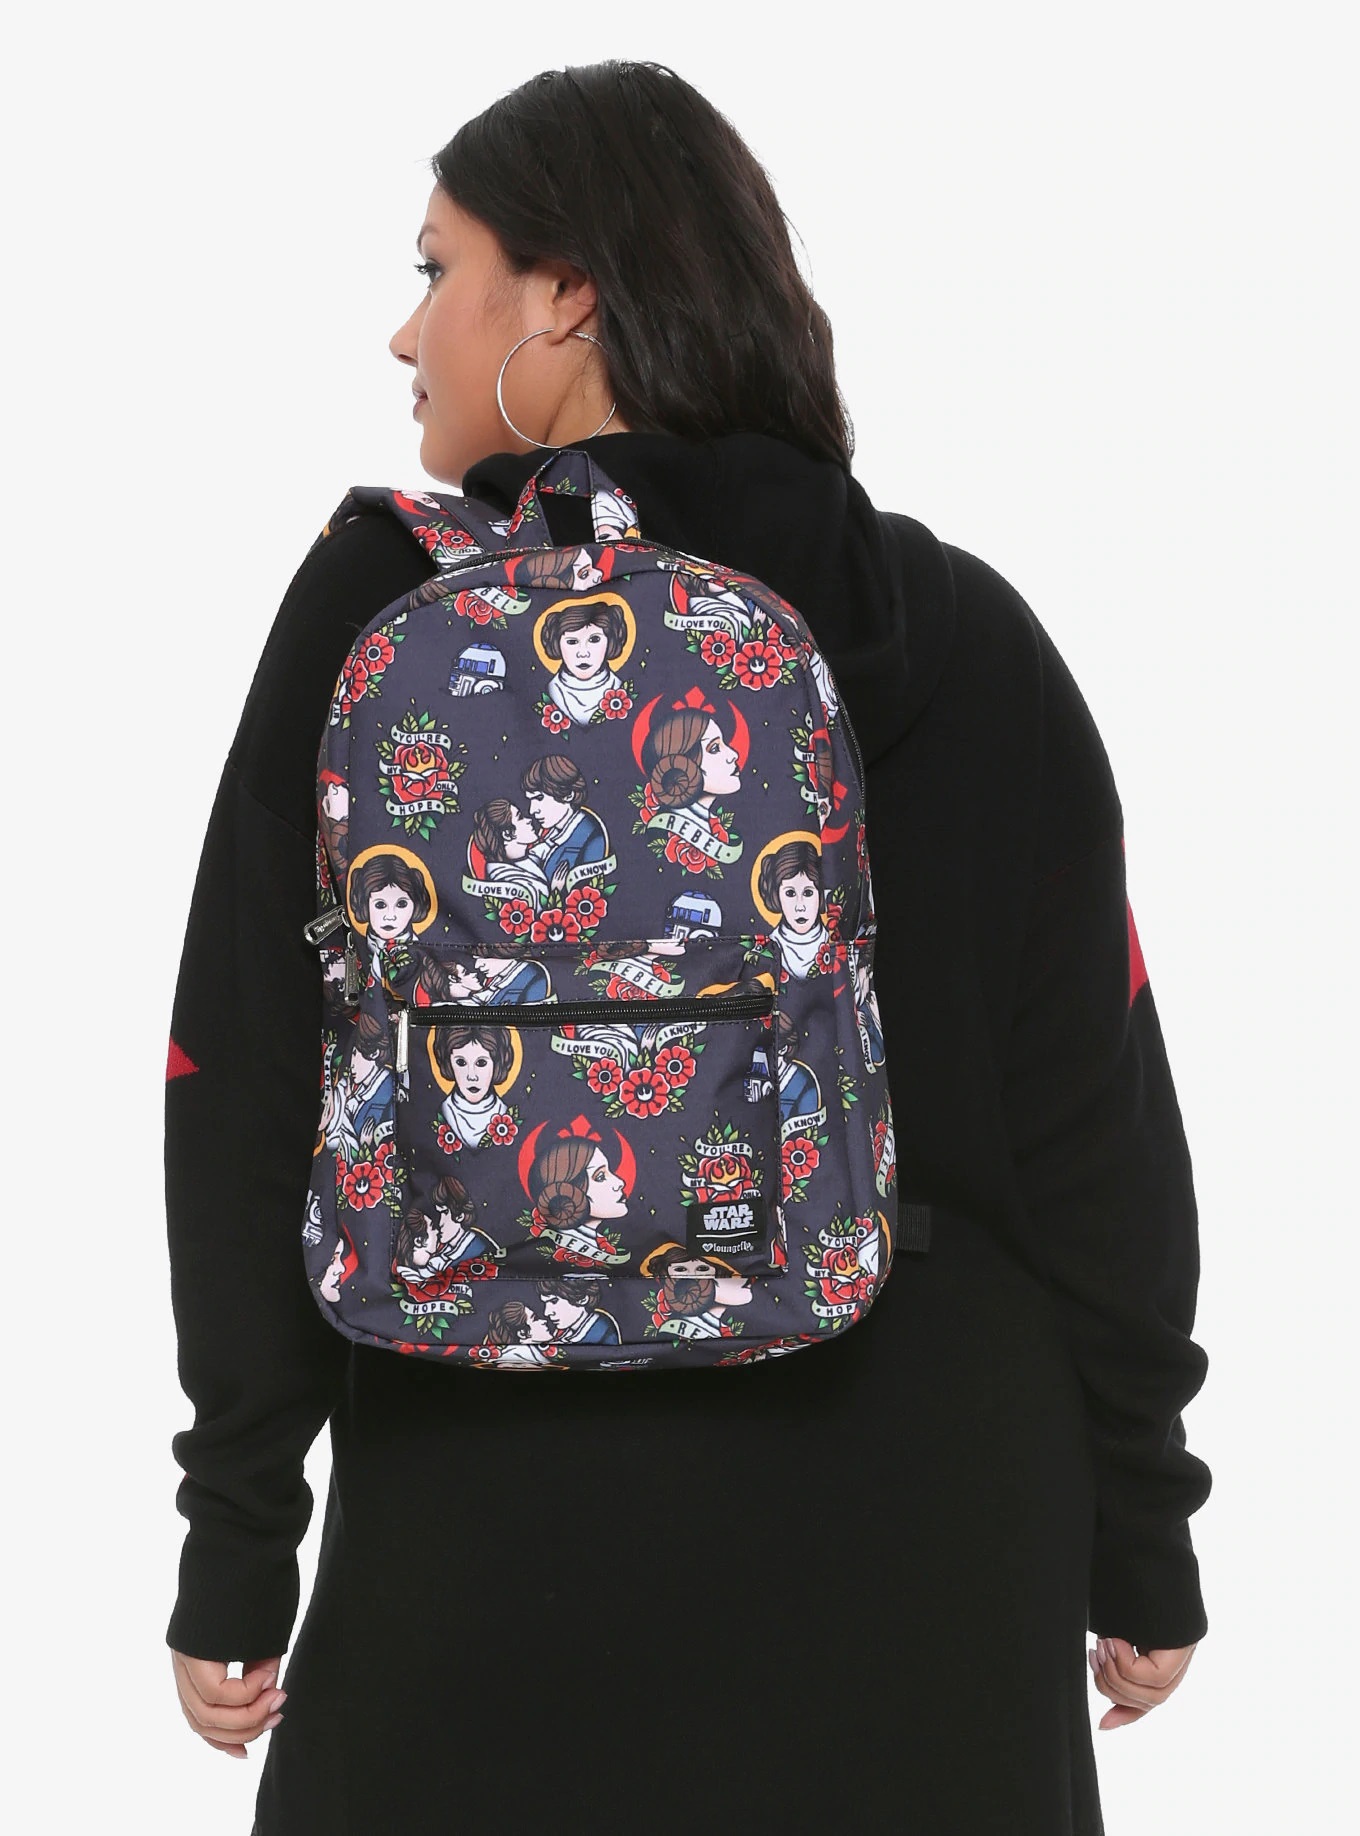 Loungefly x Star Wars Princess Leia and Han Solo Tattoo Print Backpack at Hot Topic